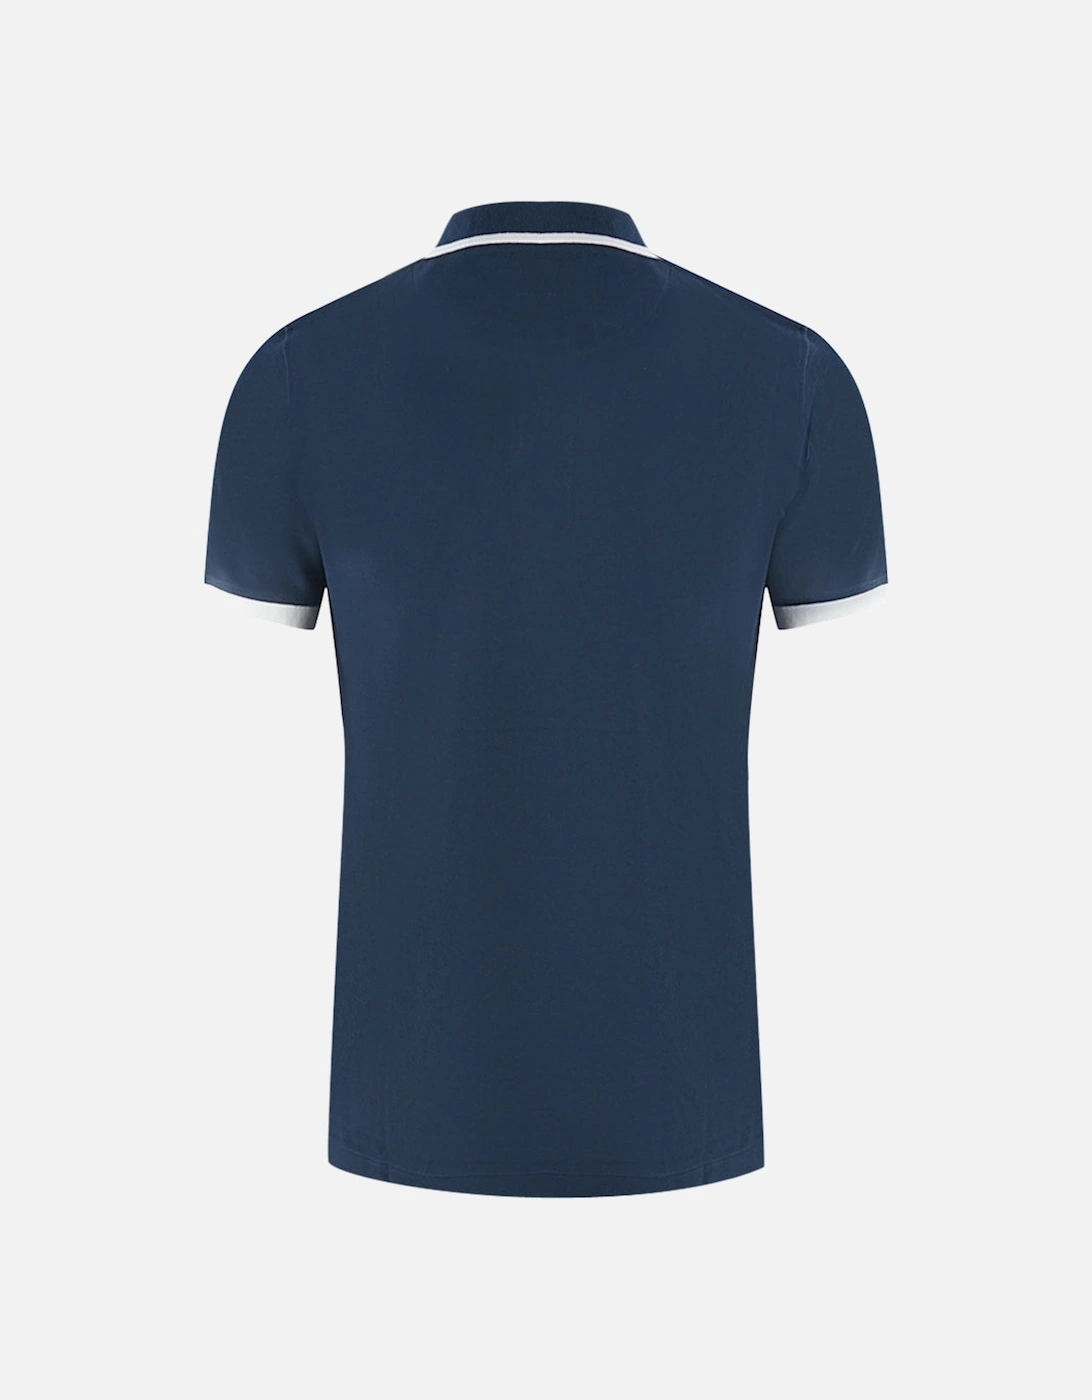 Branded Shoulder Tipped Navy Blue Polo Shirt